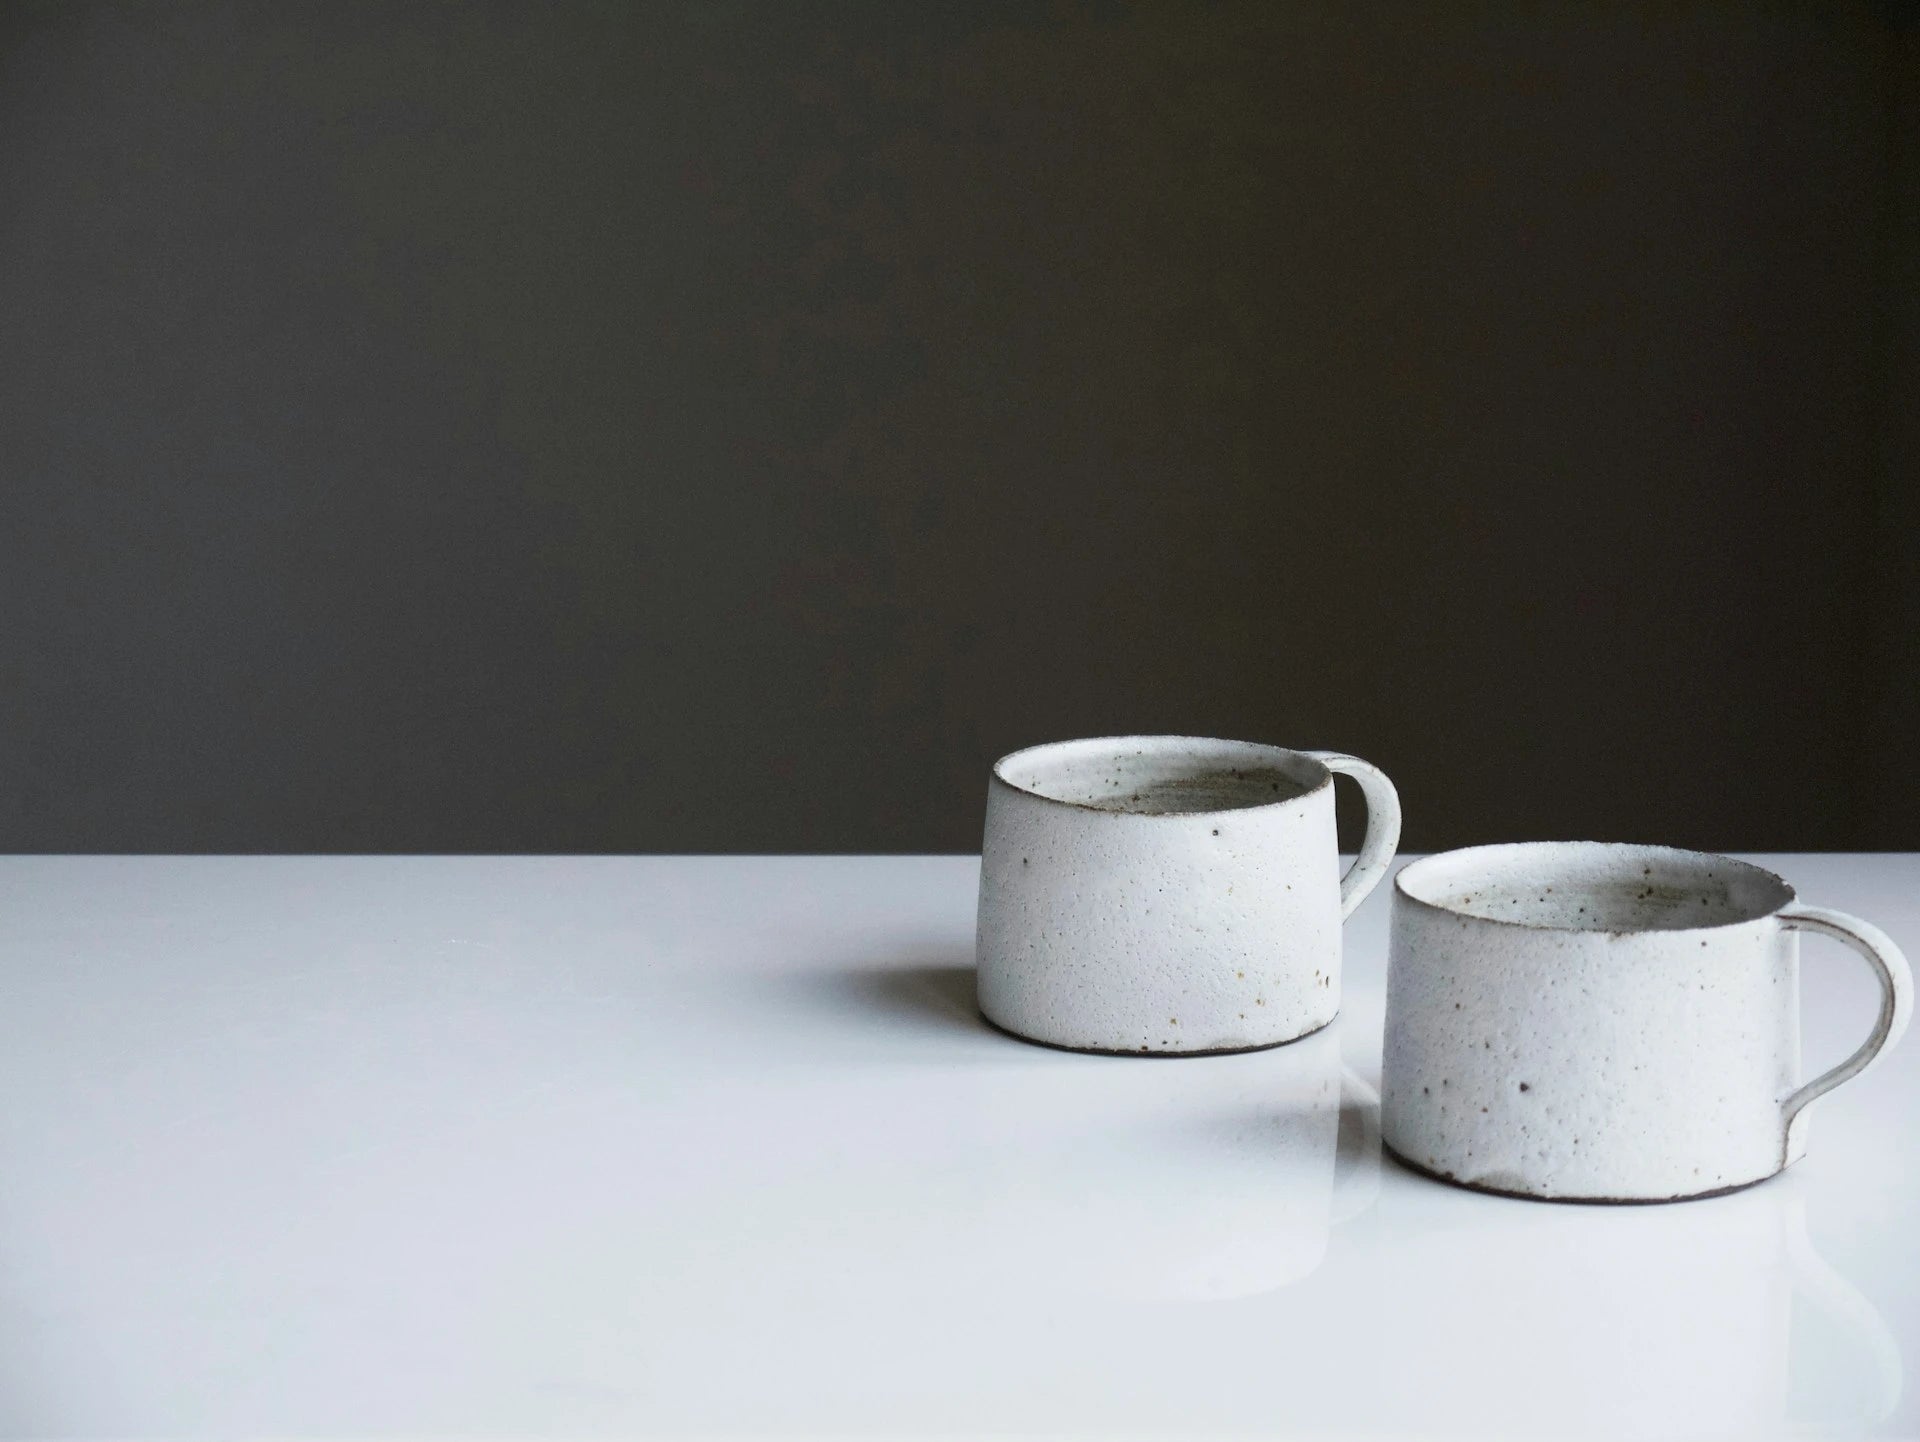 Two cups on a white table